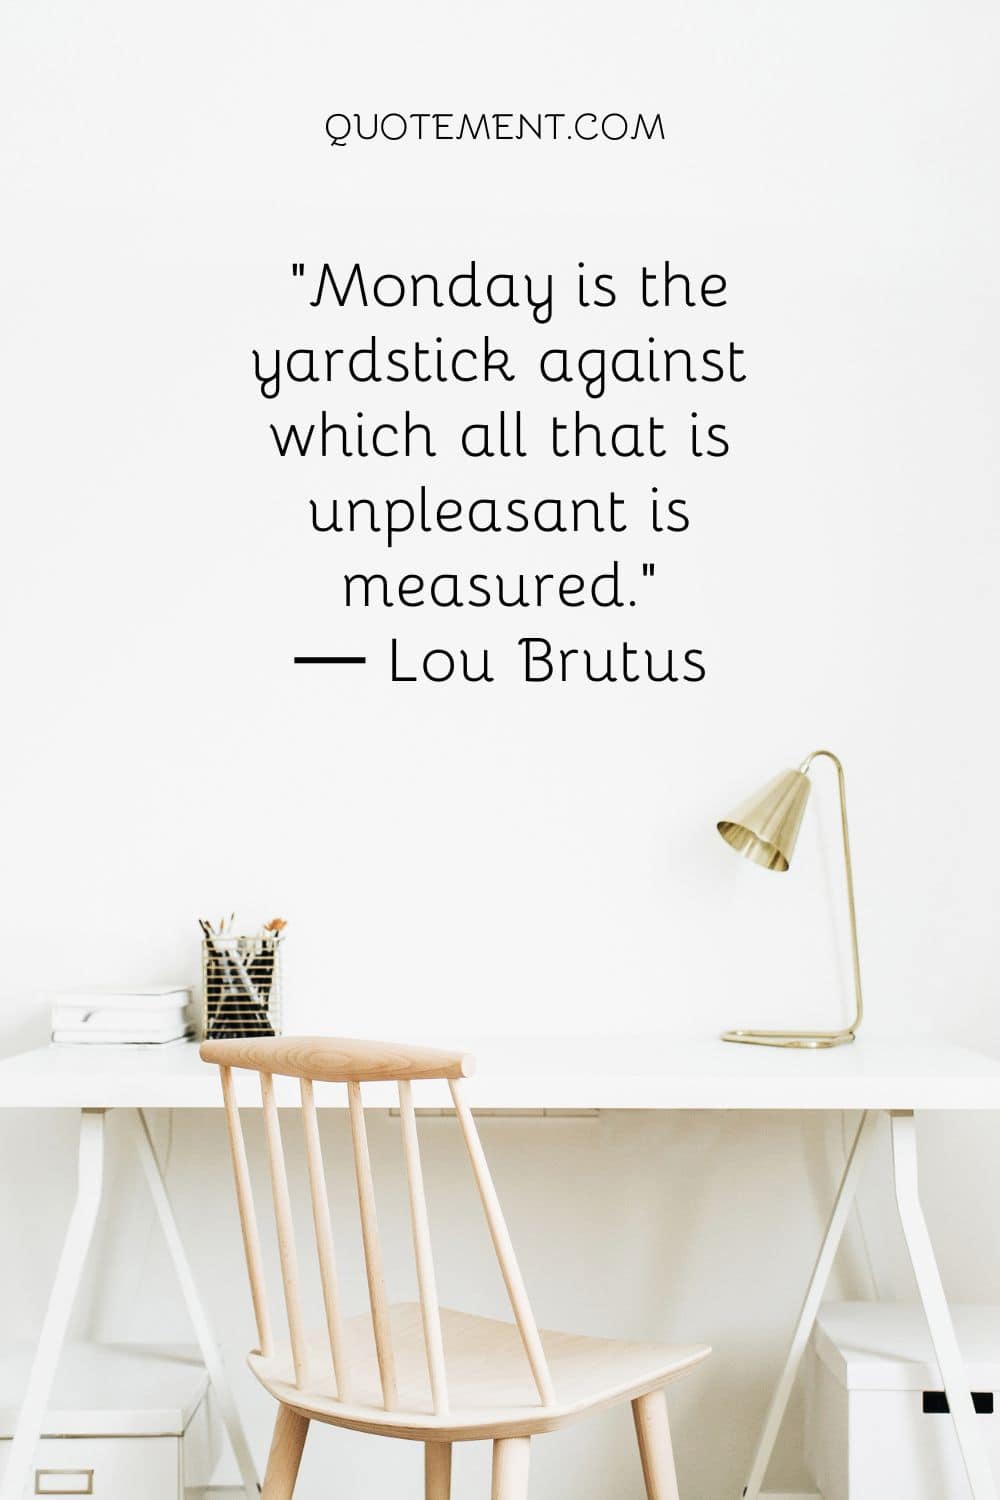 Monday is the yardstick against which all that is unpleasant is measured.